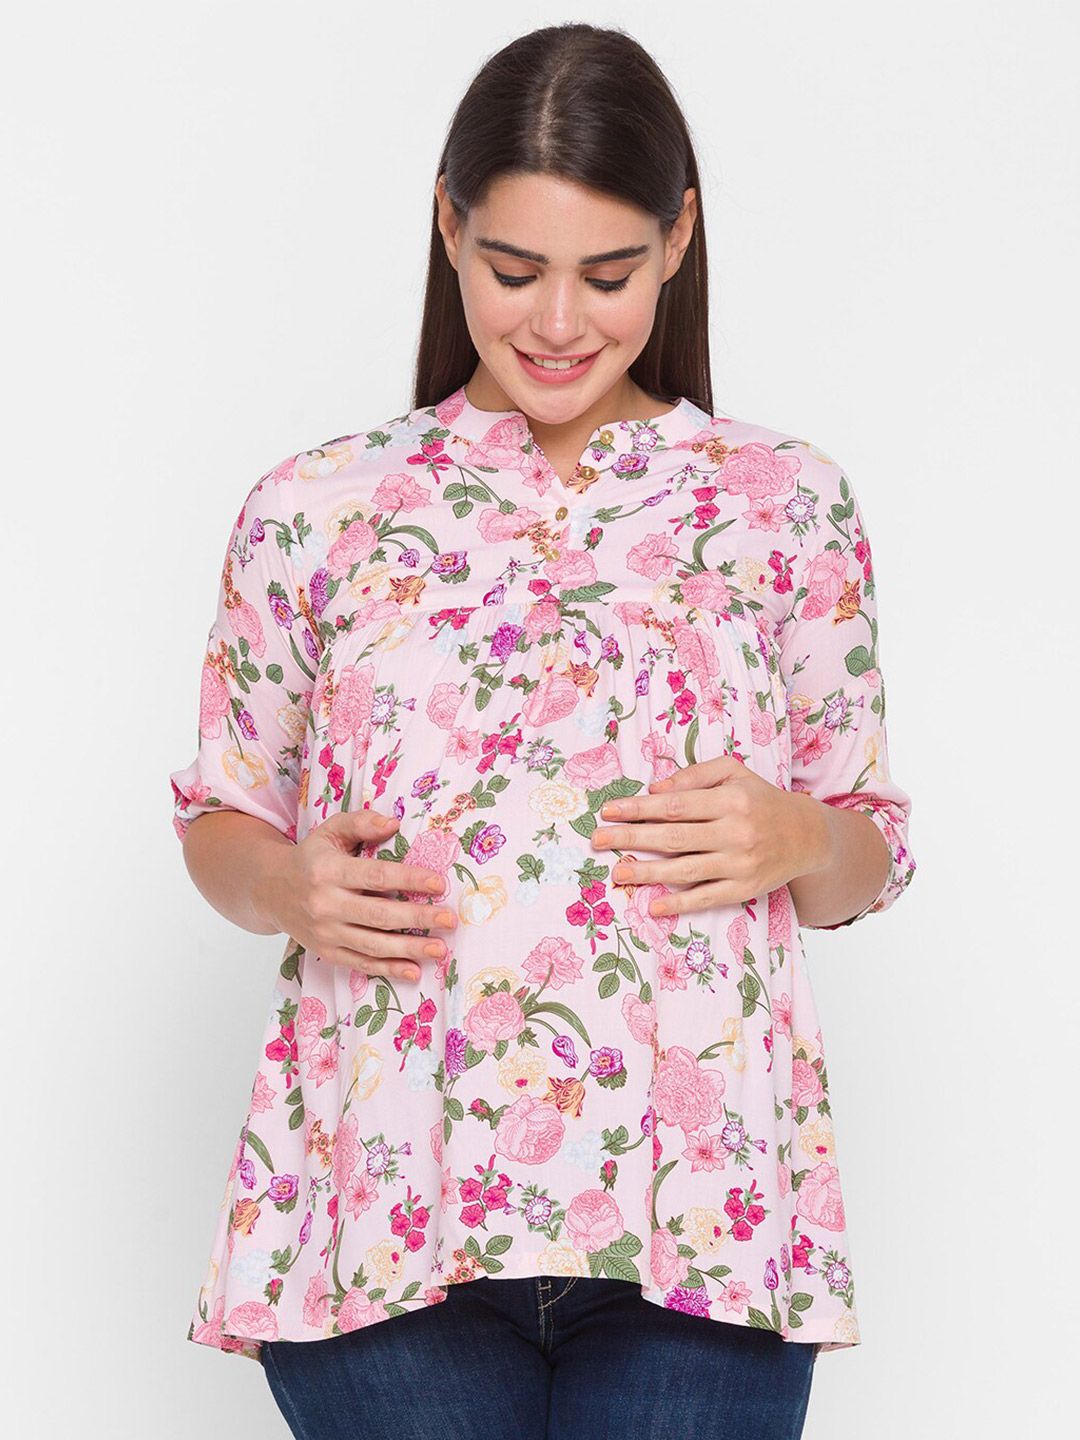 AV2 Pink Floral Print Mandarin Collar Roll-Up Sleeves Shirt Style Longline Top Price in India